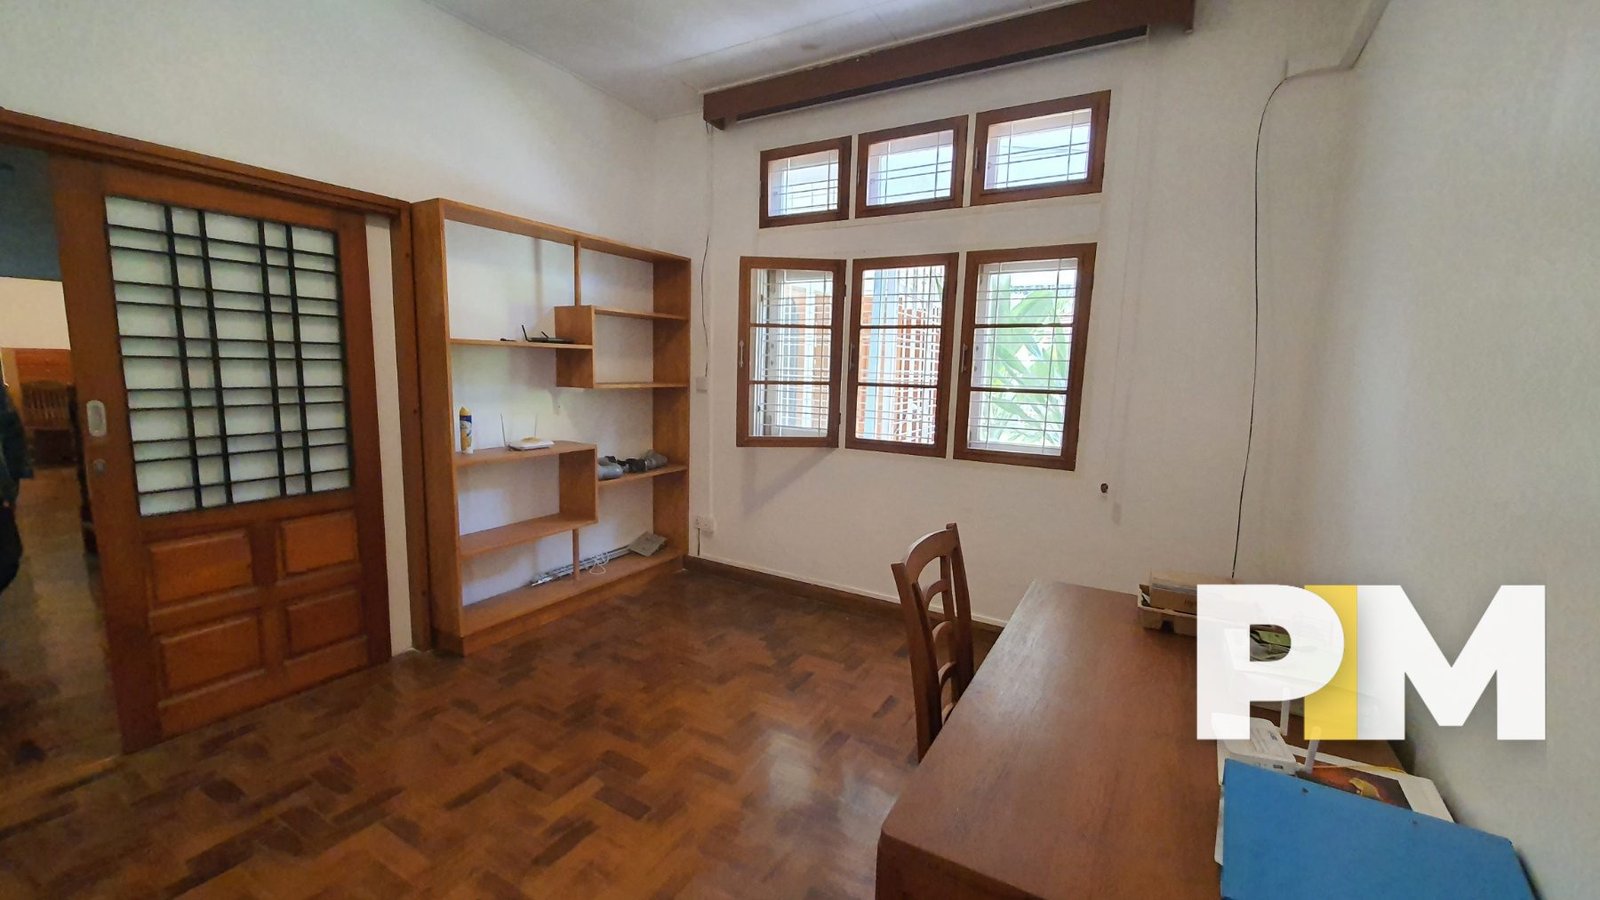 Room with windows - Real Estate in Yangon (2)